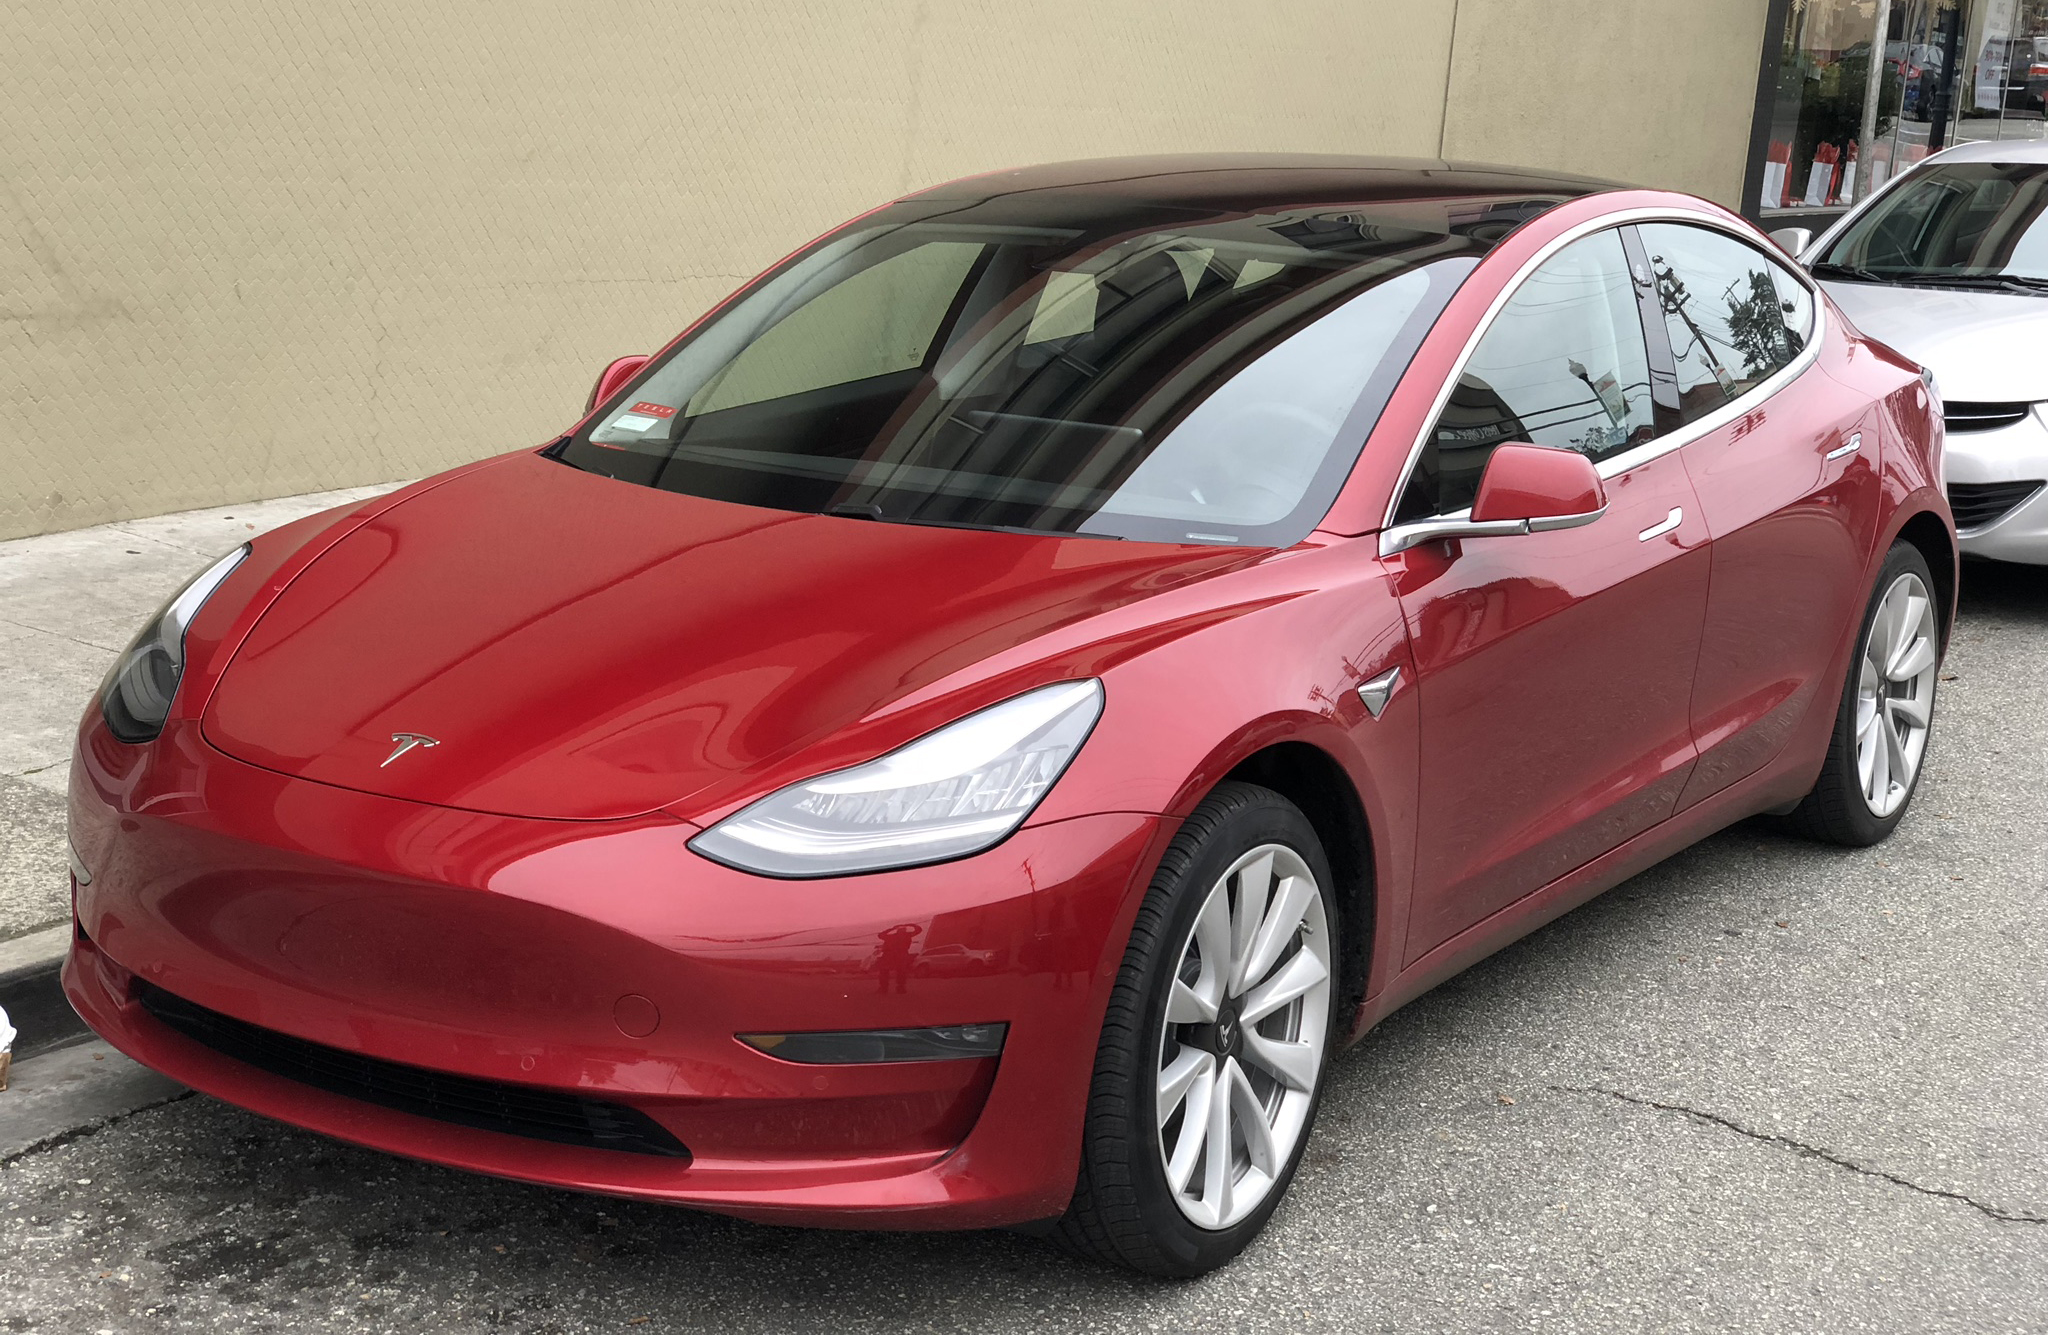 TESLA MODEL 3 HAVING 8 AIRBAGS - India's best electric vehicles